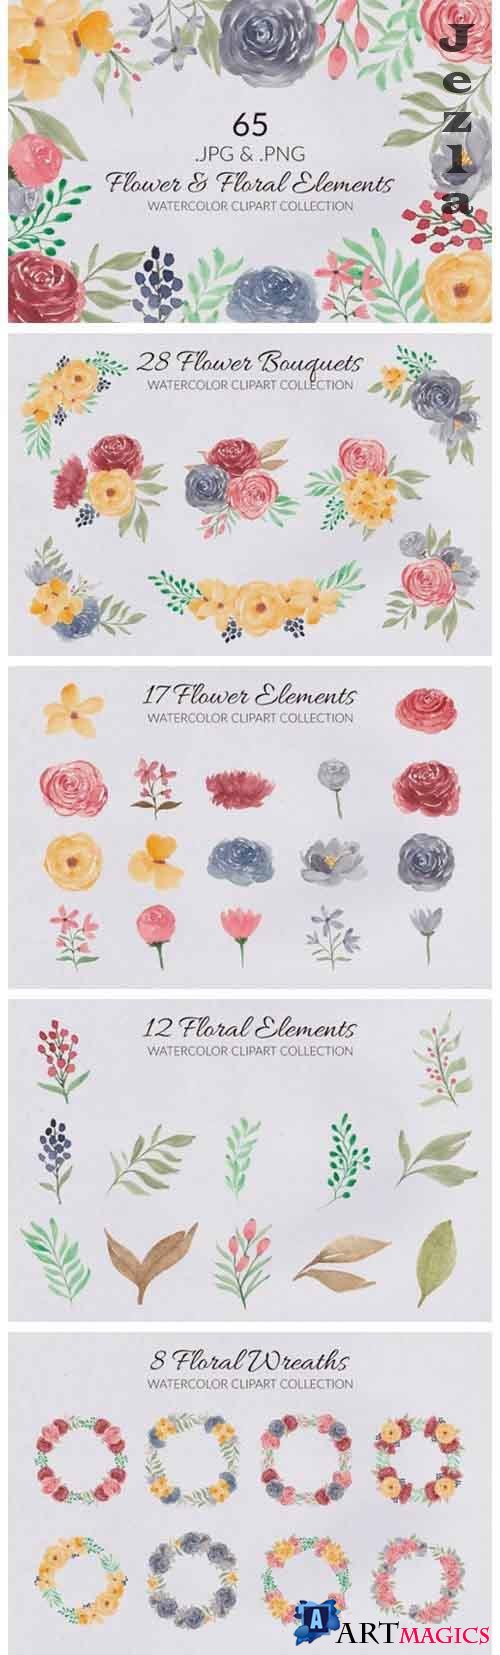 65 Flower and Floral Watercolor Illustration Clip Art - 591798